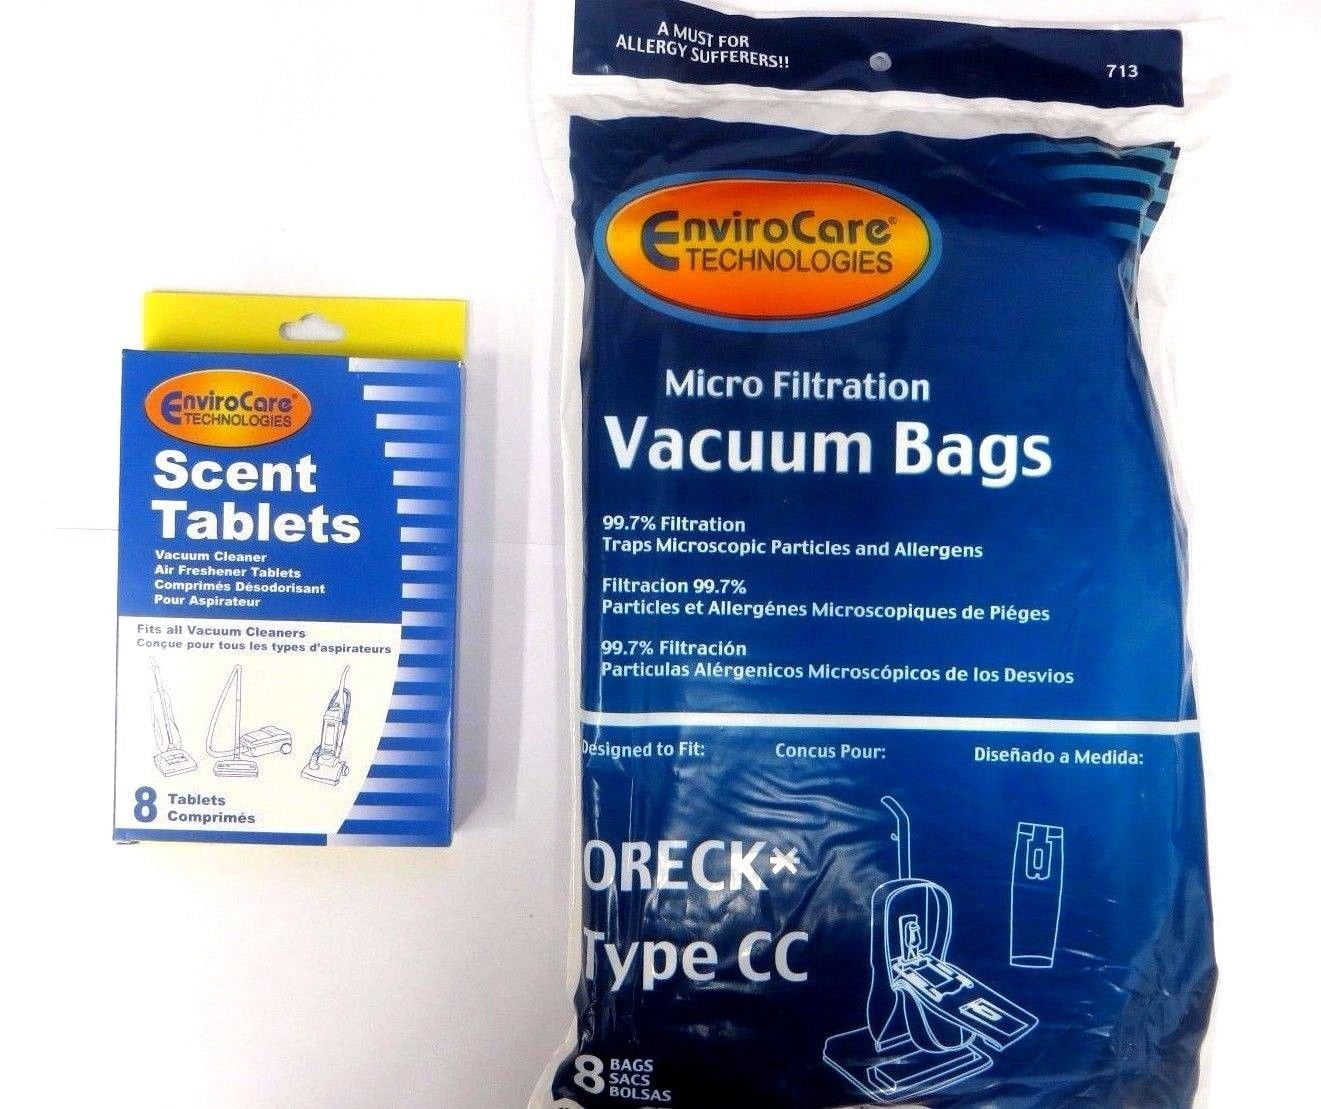 Oreck Envirocare Type CC XL Vacuum Bags XL7 XL21 Upright Vacuum Cleaners Fits C 